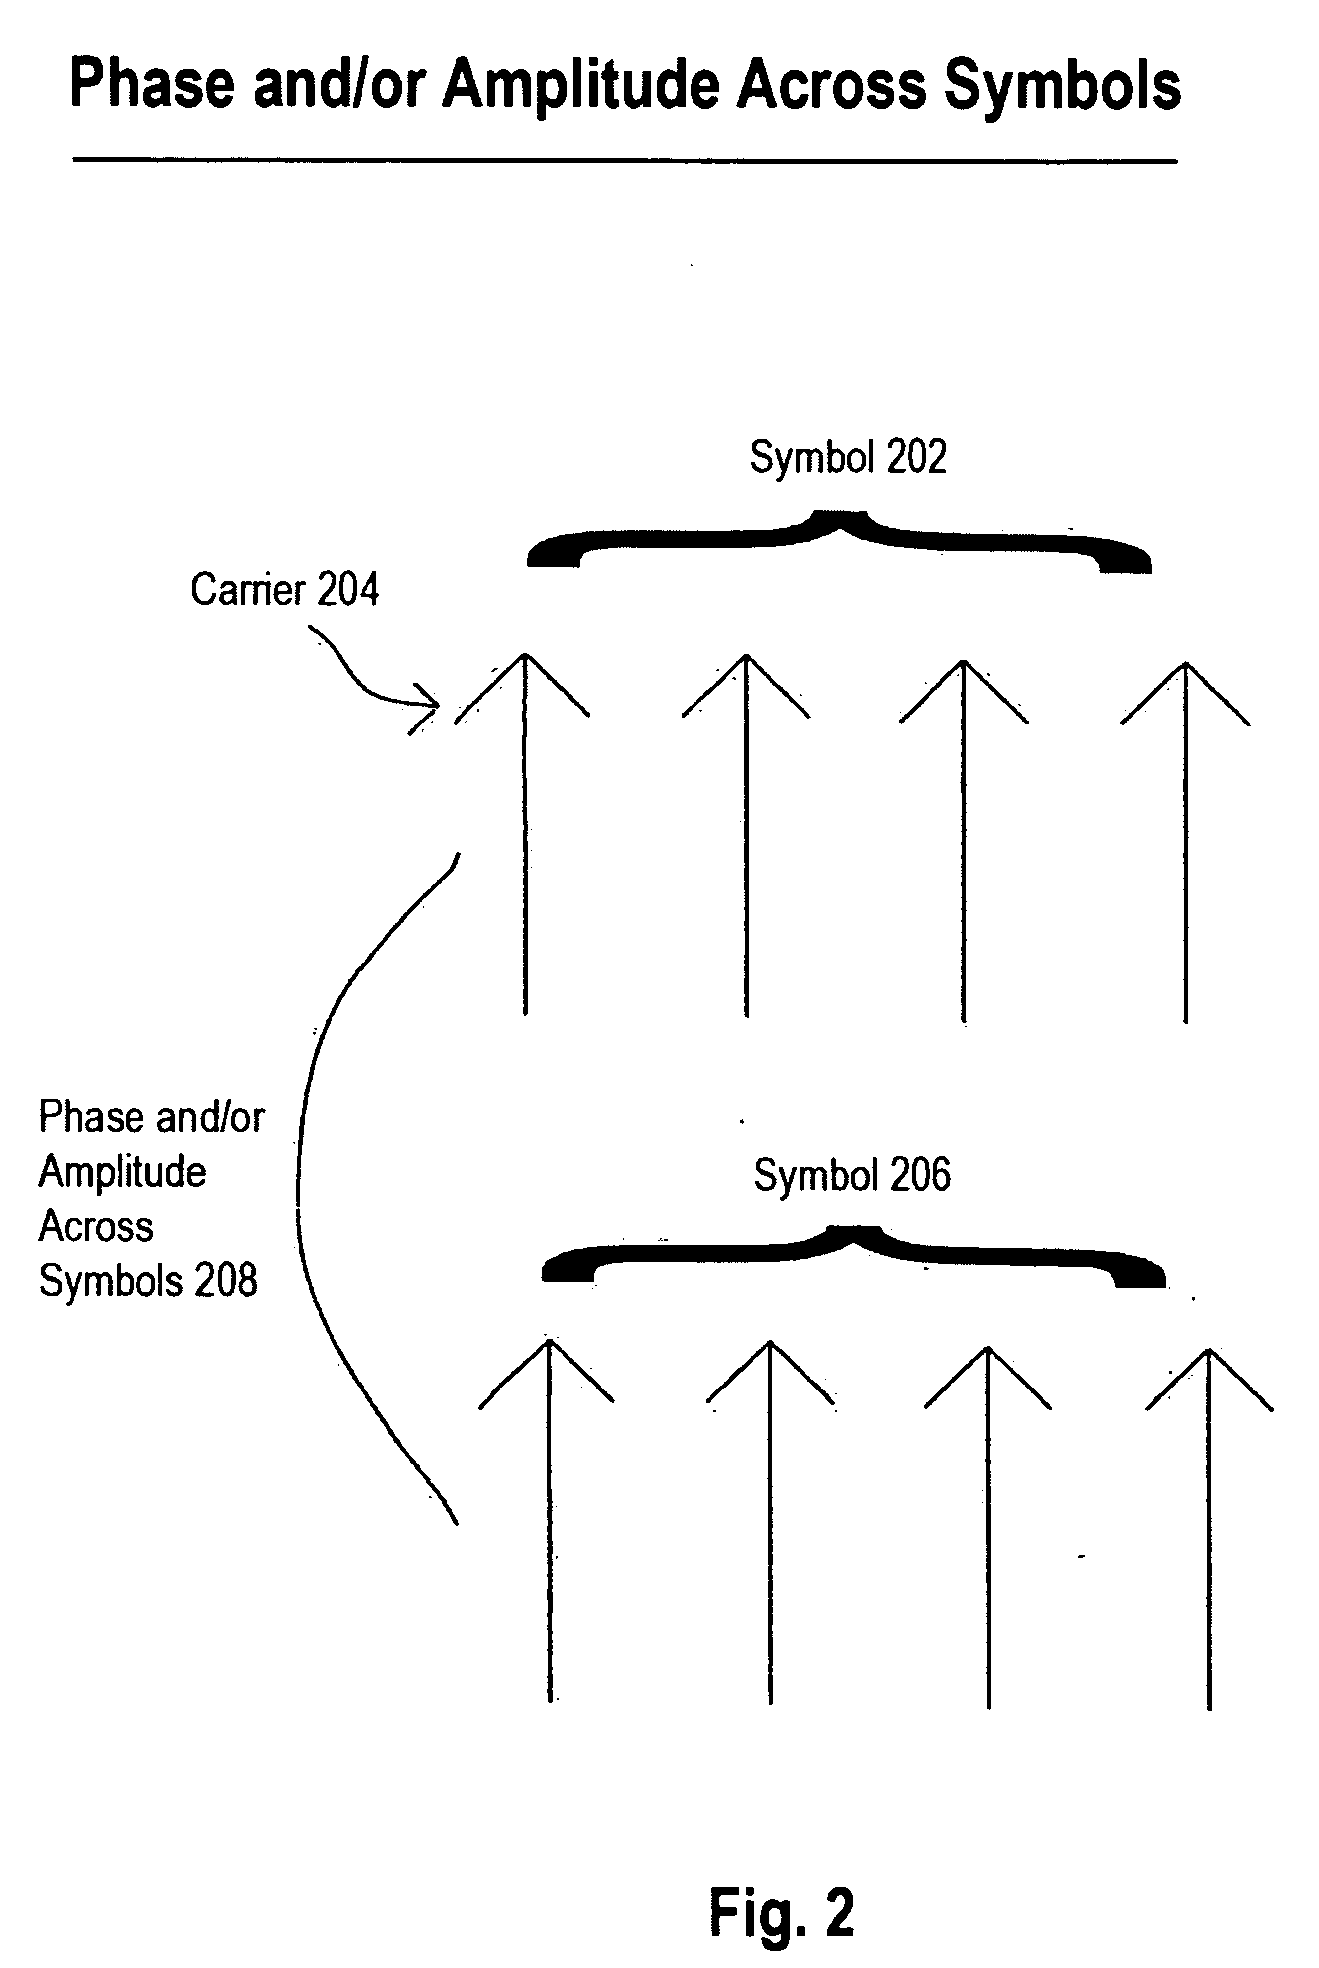 Method to enable single frequency network optimization